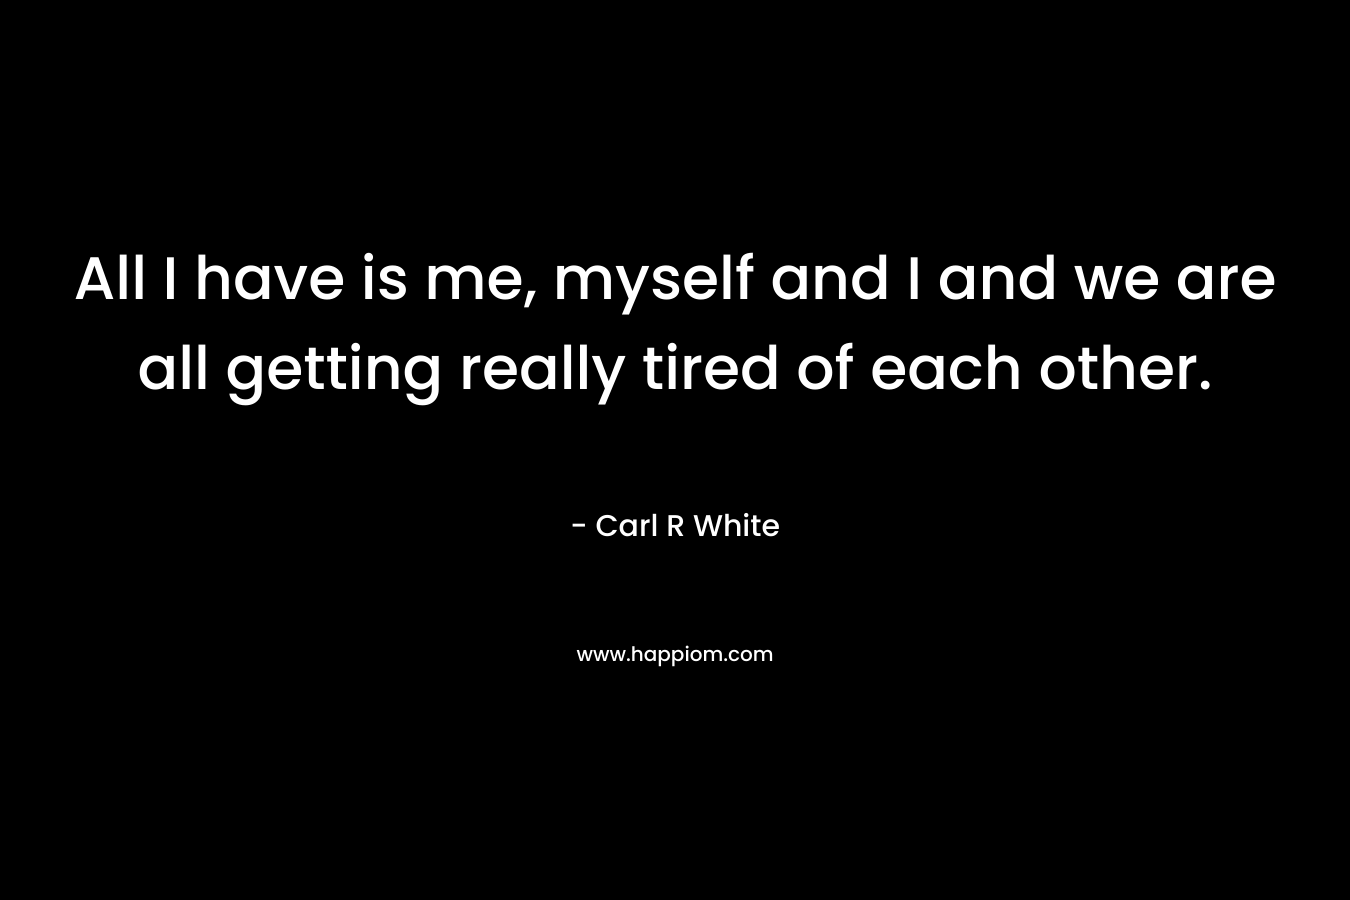 All I have is me, myself and I and we are all getting really tired of each other. – Carl R White